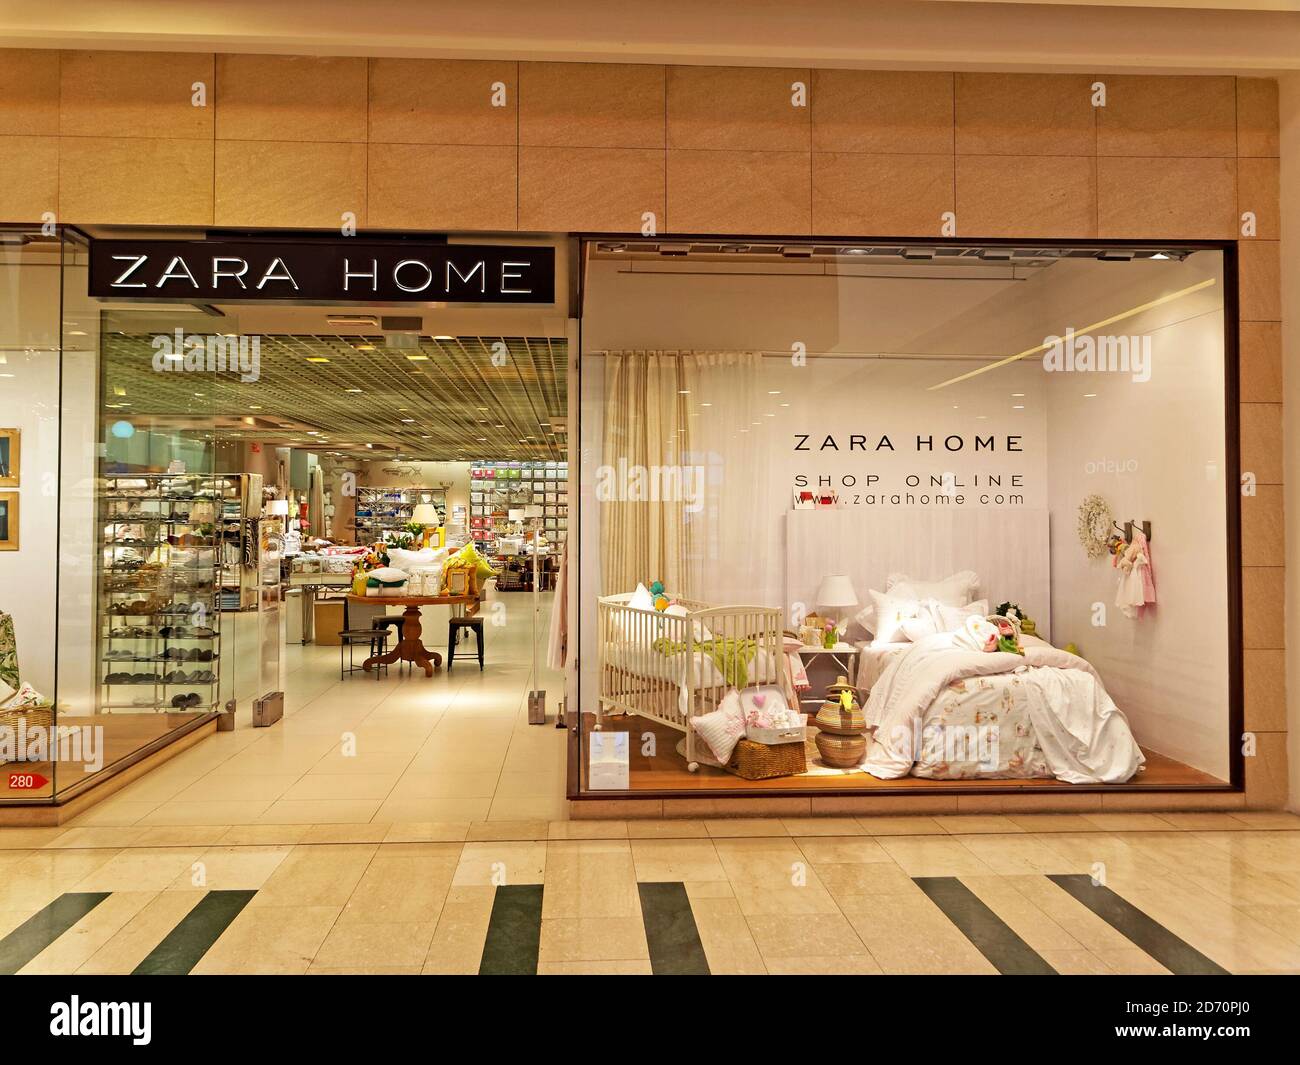 Zara Home Collection High Resolution Stock Photography and Images - Alamy